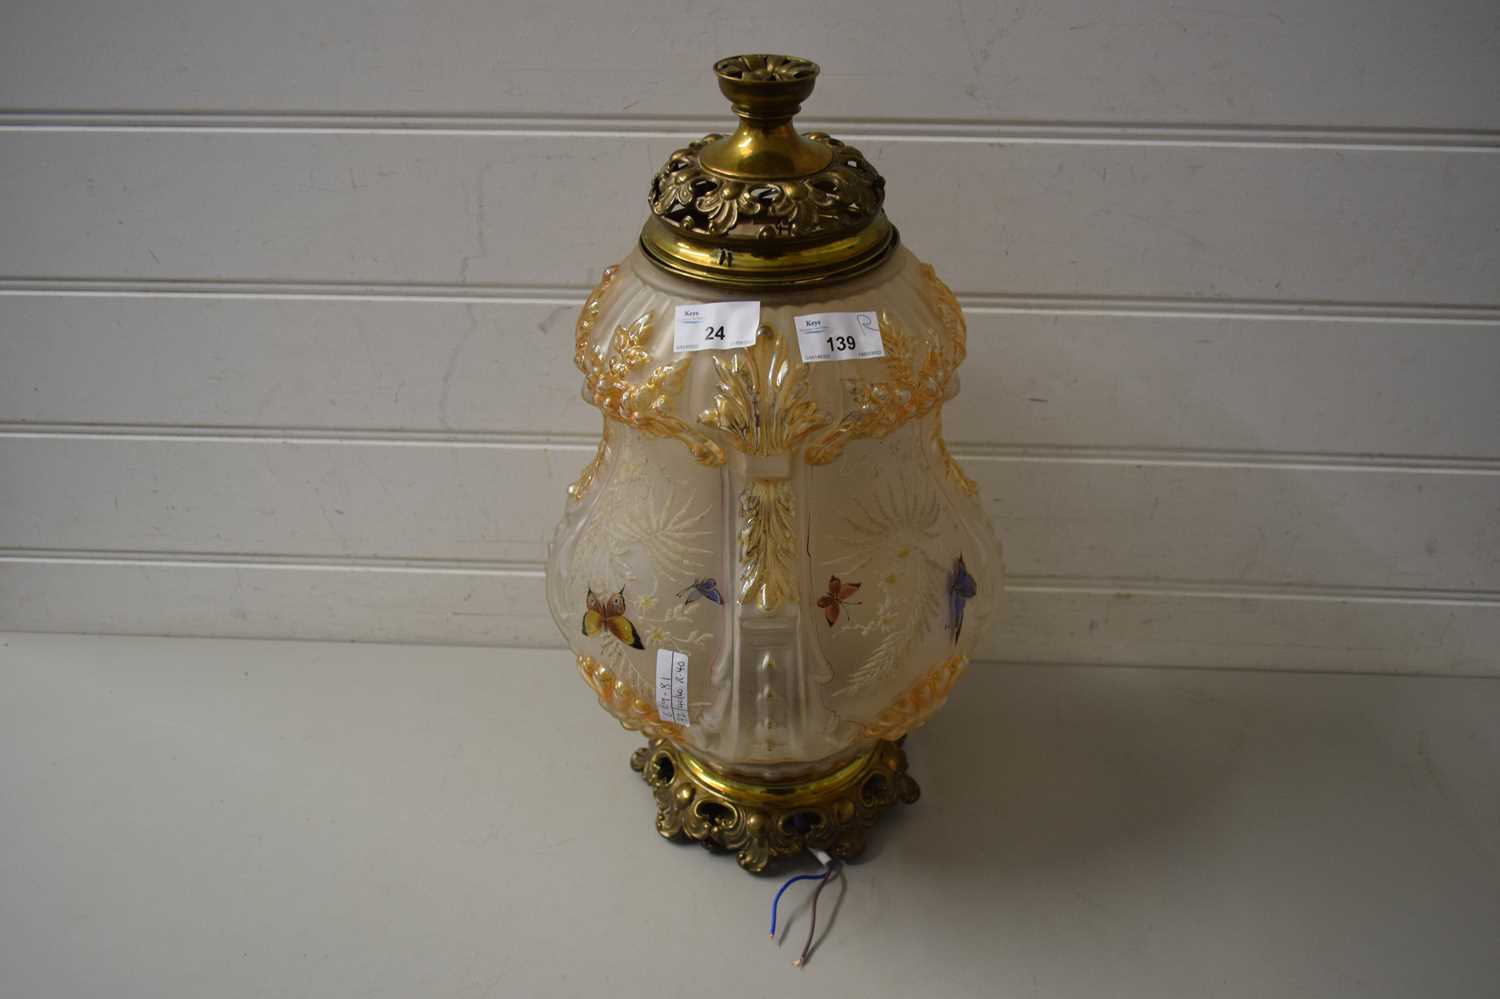 HAND PAINTED OPAQUE GLASS AND BRASS MOUNTED HANGING CEILING LIGHT FITTING